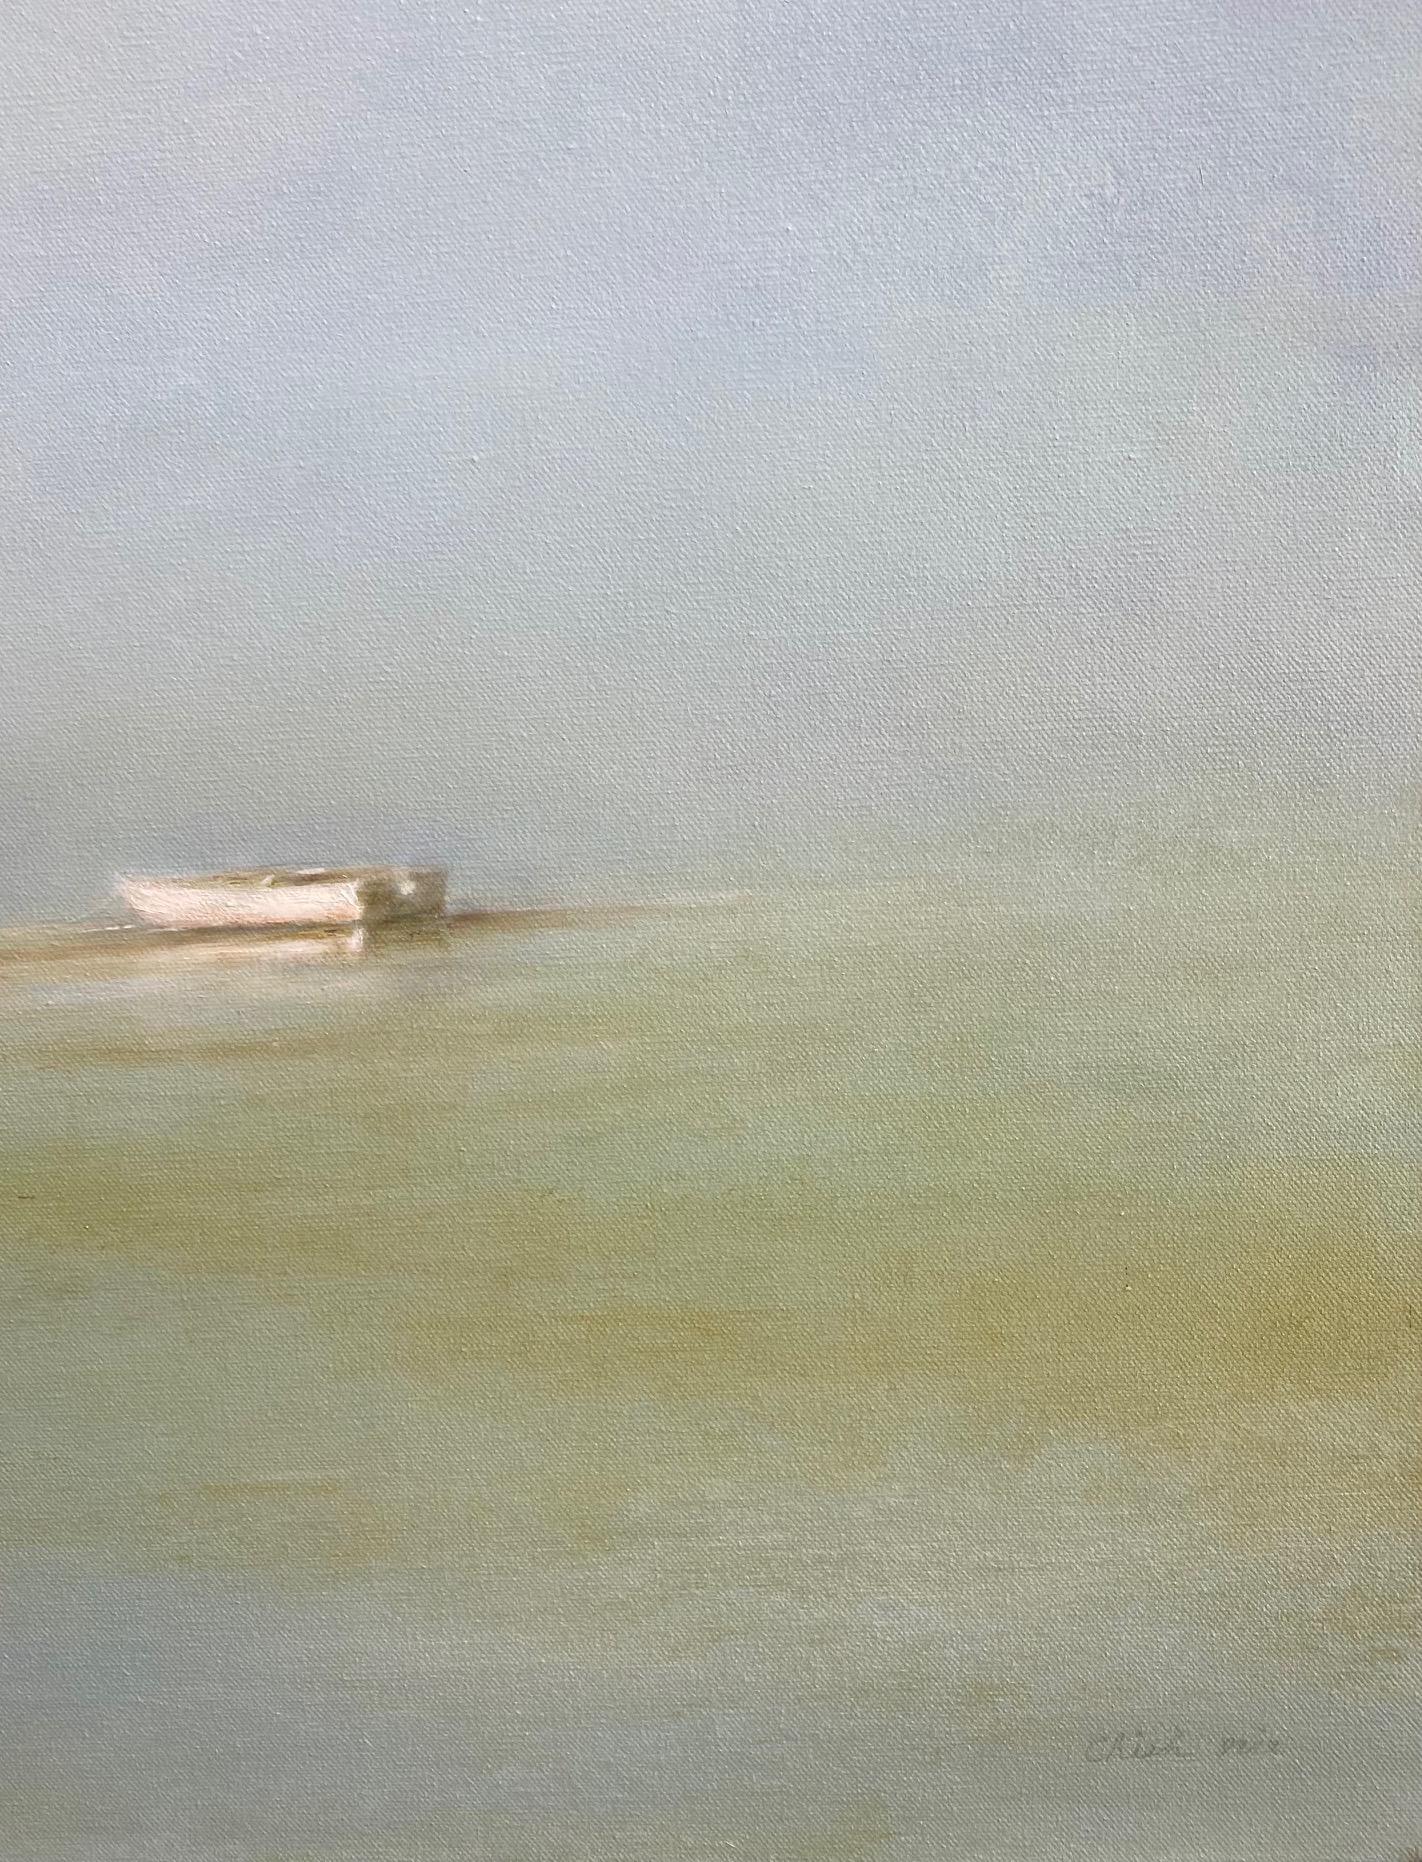 Dinghy at Sea, 40x30 original contemporary marine landscape - Gray Landscape Painting by Chieh-Nie Cherng